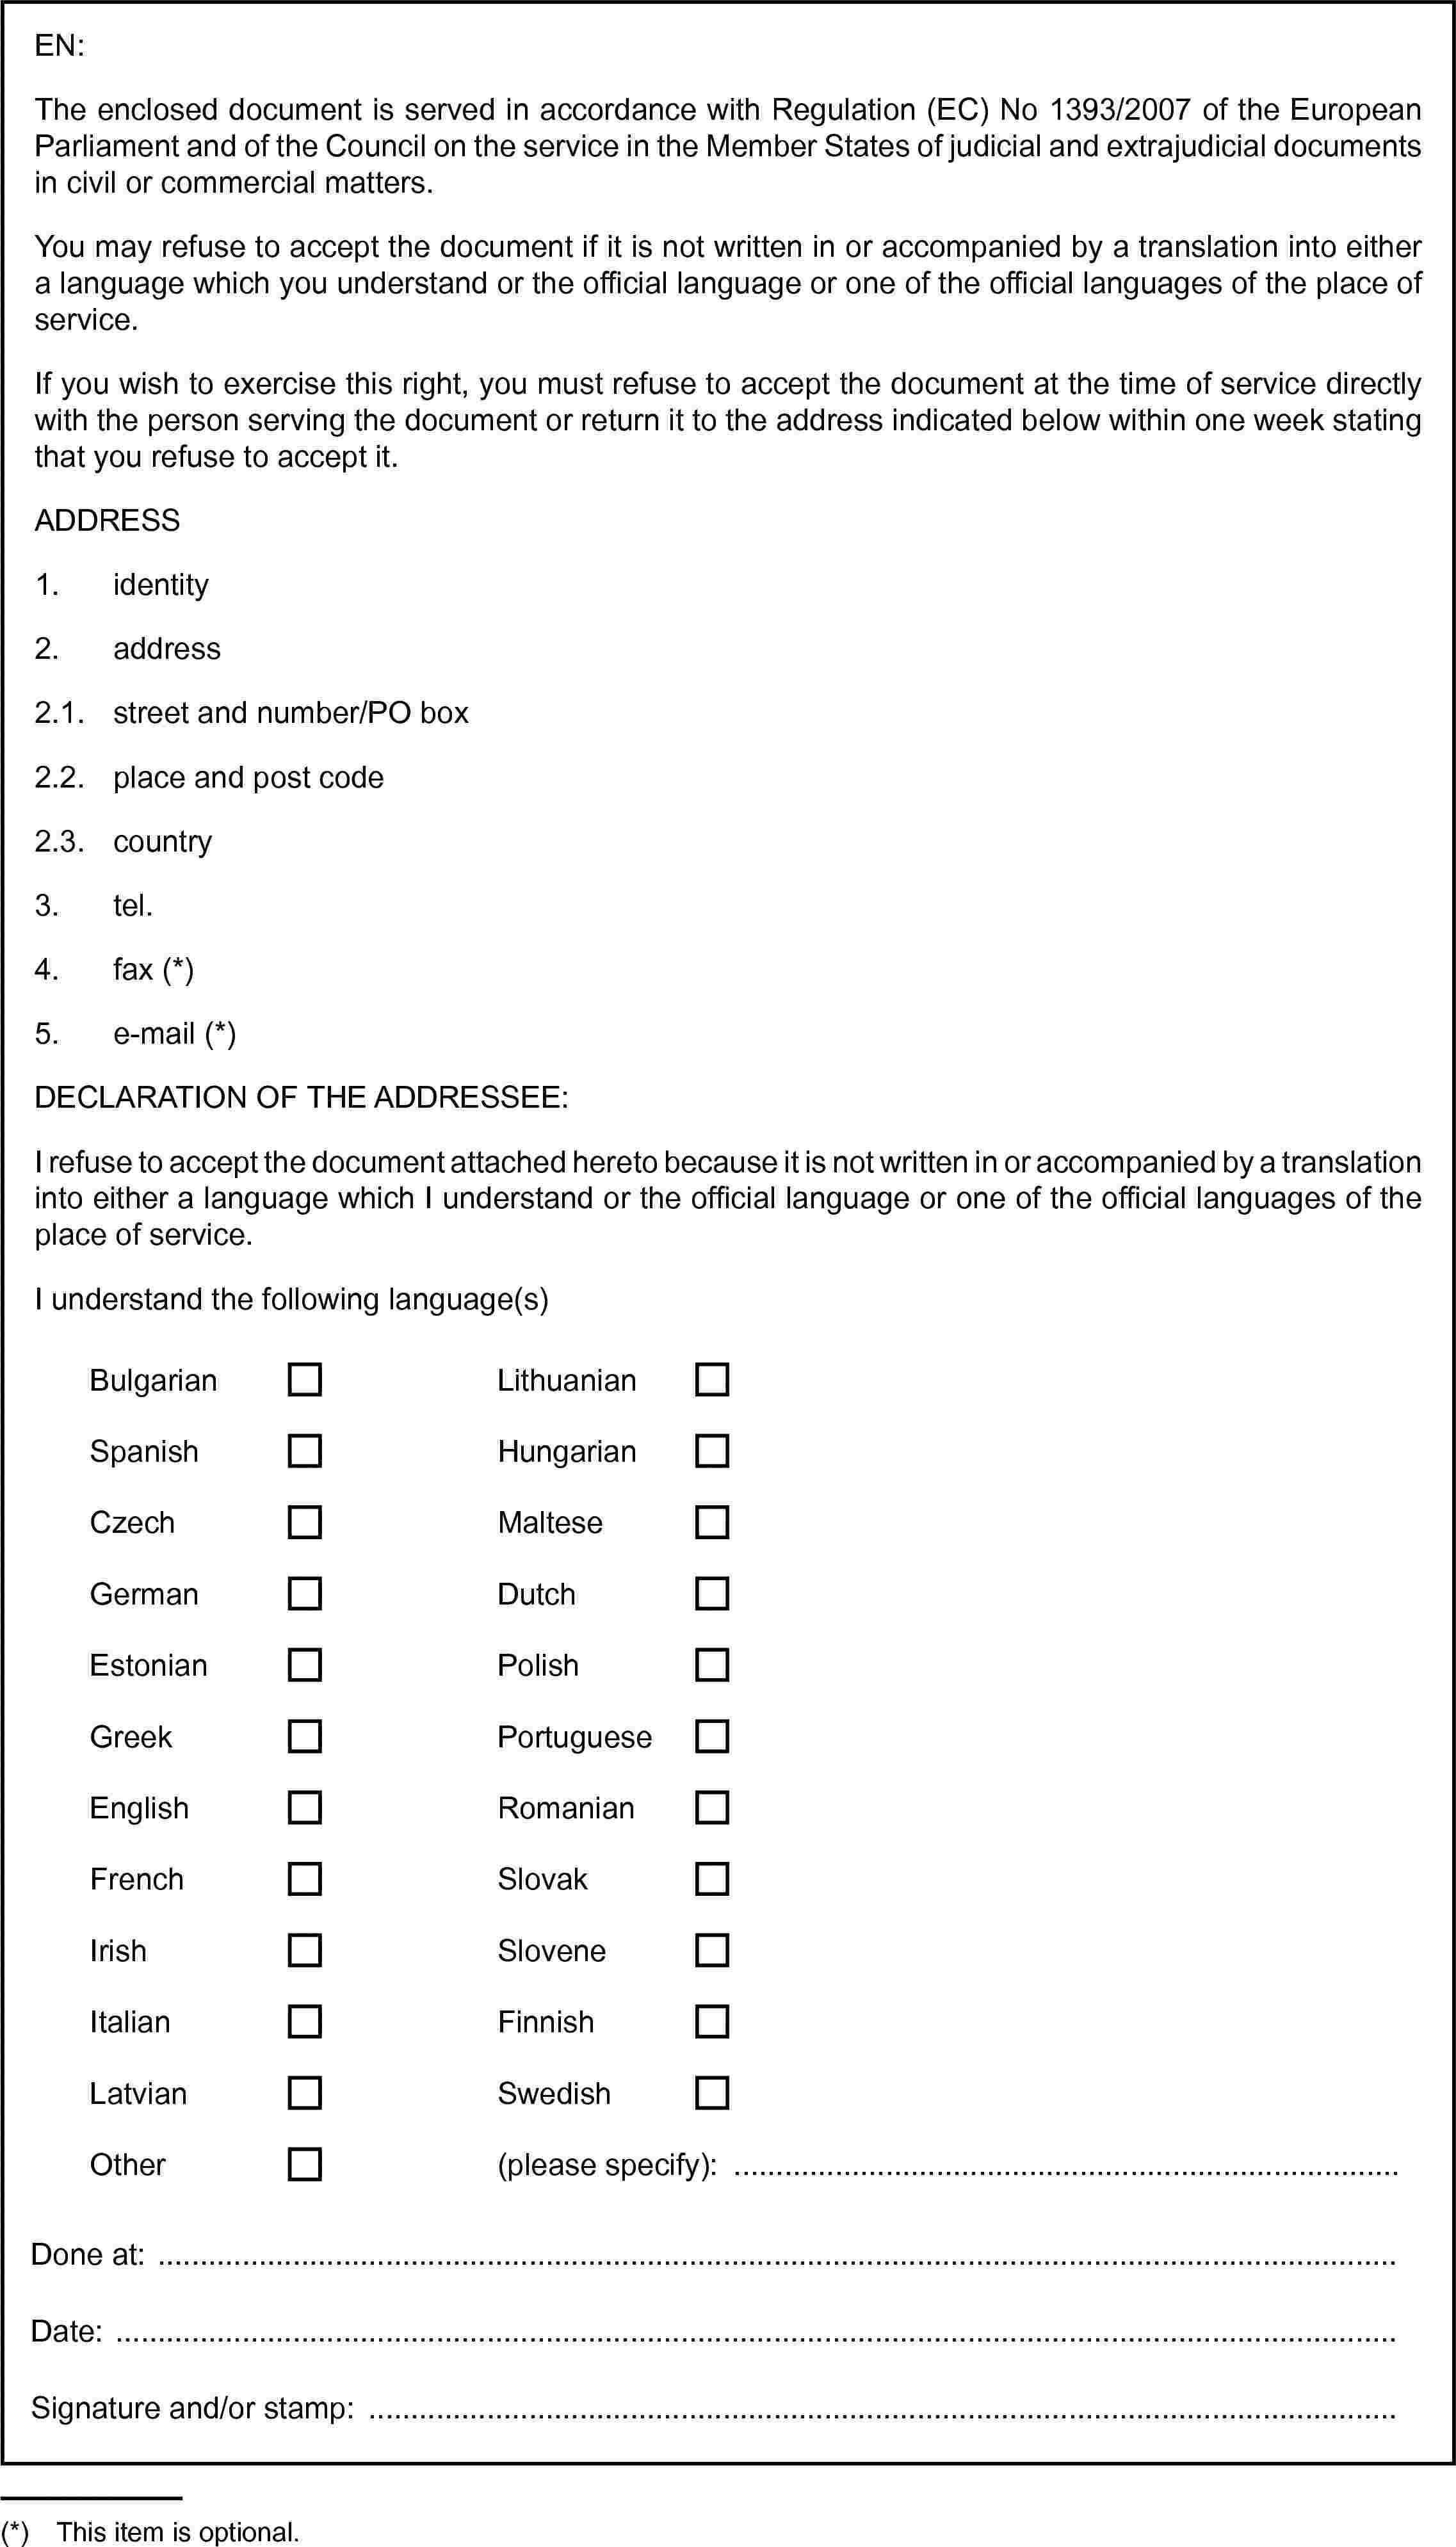 BulgarianLithuanianEN:The enclosed document is served in accordance with Regulation (EC) No 1393/2007 of the European Parliament and of the Council on the service in the Member States of judicial and extrajudicial documents in civil or commercial matters.You may refuse to accept the document if it is not written in or accompanied by a translation into either a language which you understand or the official language or one of the official languages of the place of service.If you wish to exercise this right, you must refuse to accept the document at the time of service directly with the person serving the document or return it to the address indicated below within one week stating that you refuse to accept it.ADDRESS1. identity2. address2.1. street and number/PO box2.2. place and post code2.3. country3. tel.4. fax (*)5. e-mail (*)DECLARATION OF THE ADDRESSEE:I refuse to accept the document attached hereto because it is not written in or accompanied by a translation into either a language which I understand or the official language or one of the official languages of the place of service.I understand the following language(s)SpanishHungarianCzechMalteseGermanDutchEstonianPolishGreekPortugueseEnglishRomanianFrenchSlovakIrishSloveneItalianFinnishLatvianSwedishOther(please specify): …Done at:Date:Signature and/or stamp: …(*) This item is optional.